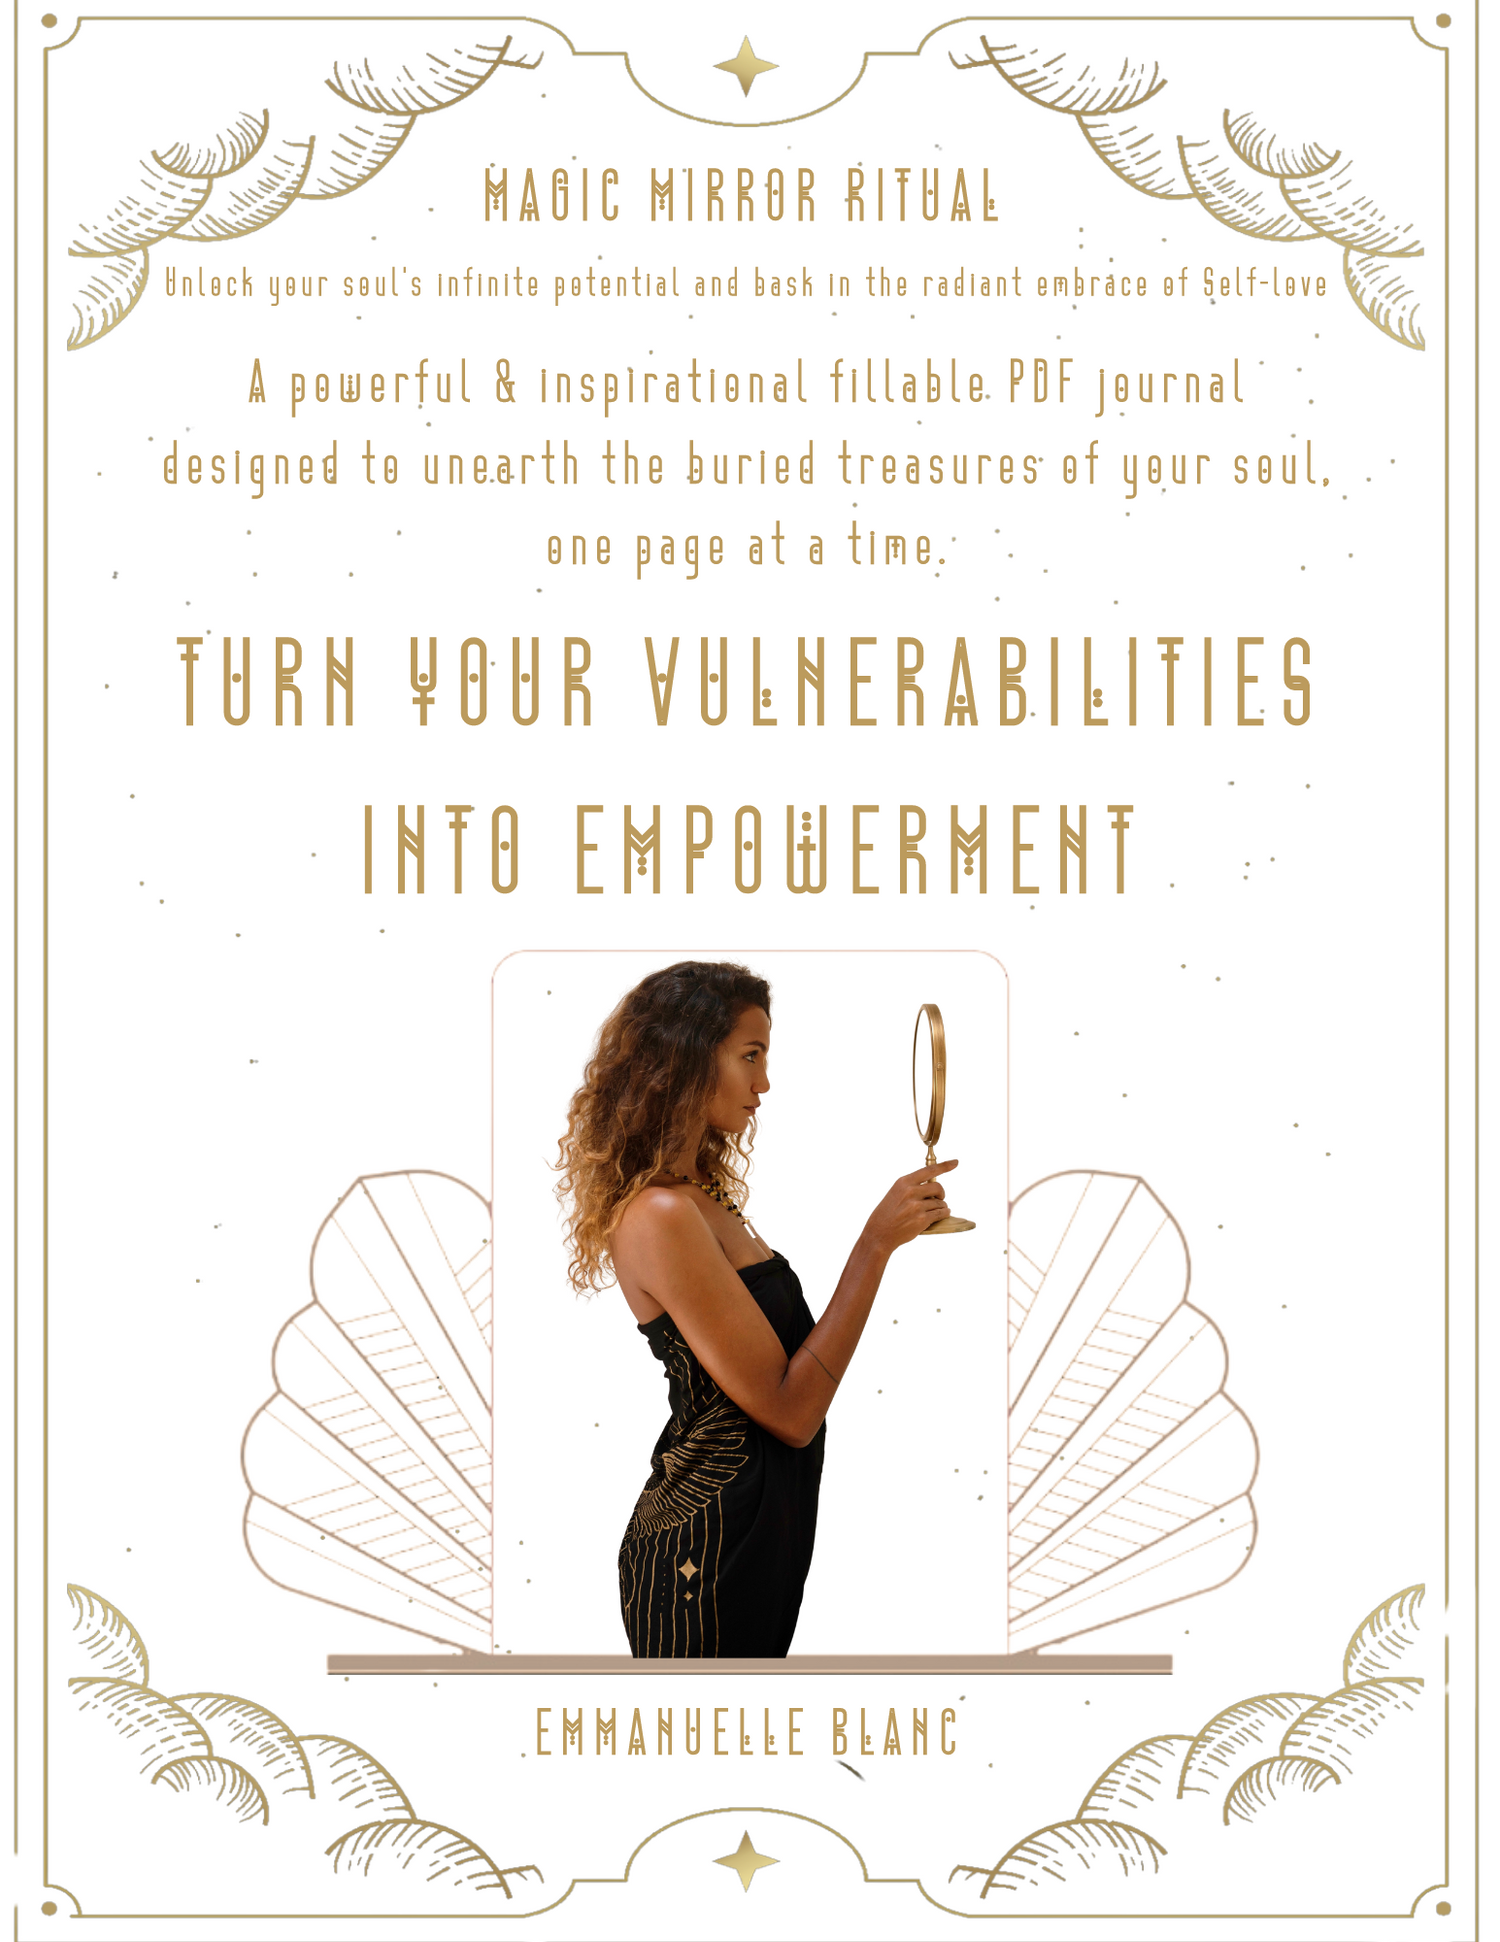 Turn your vulnerabilities into empowerment through a powerful &amp; inspirational fillable PDF journal  by emmanuelle Blanc from Unleash your inner wealth